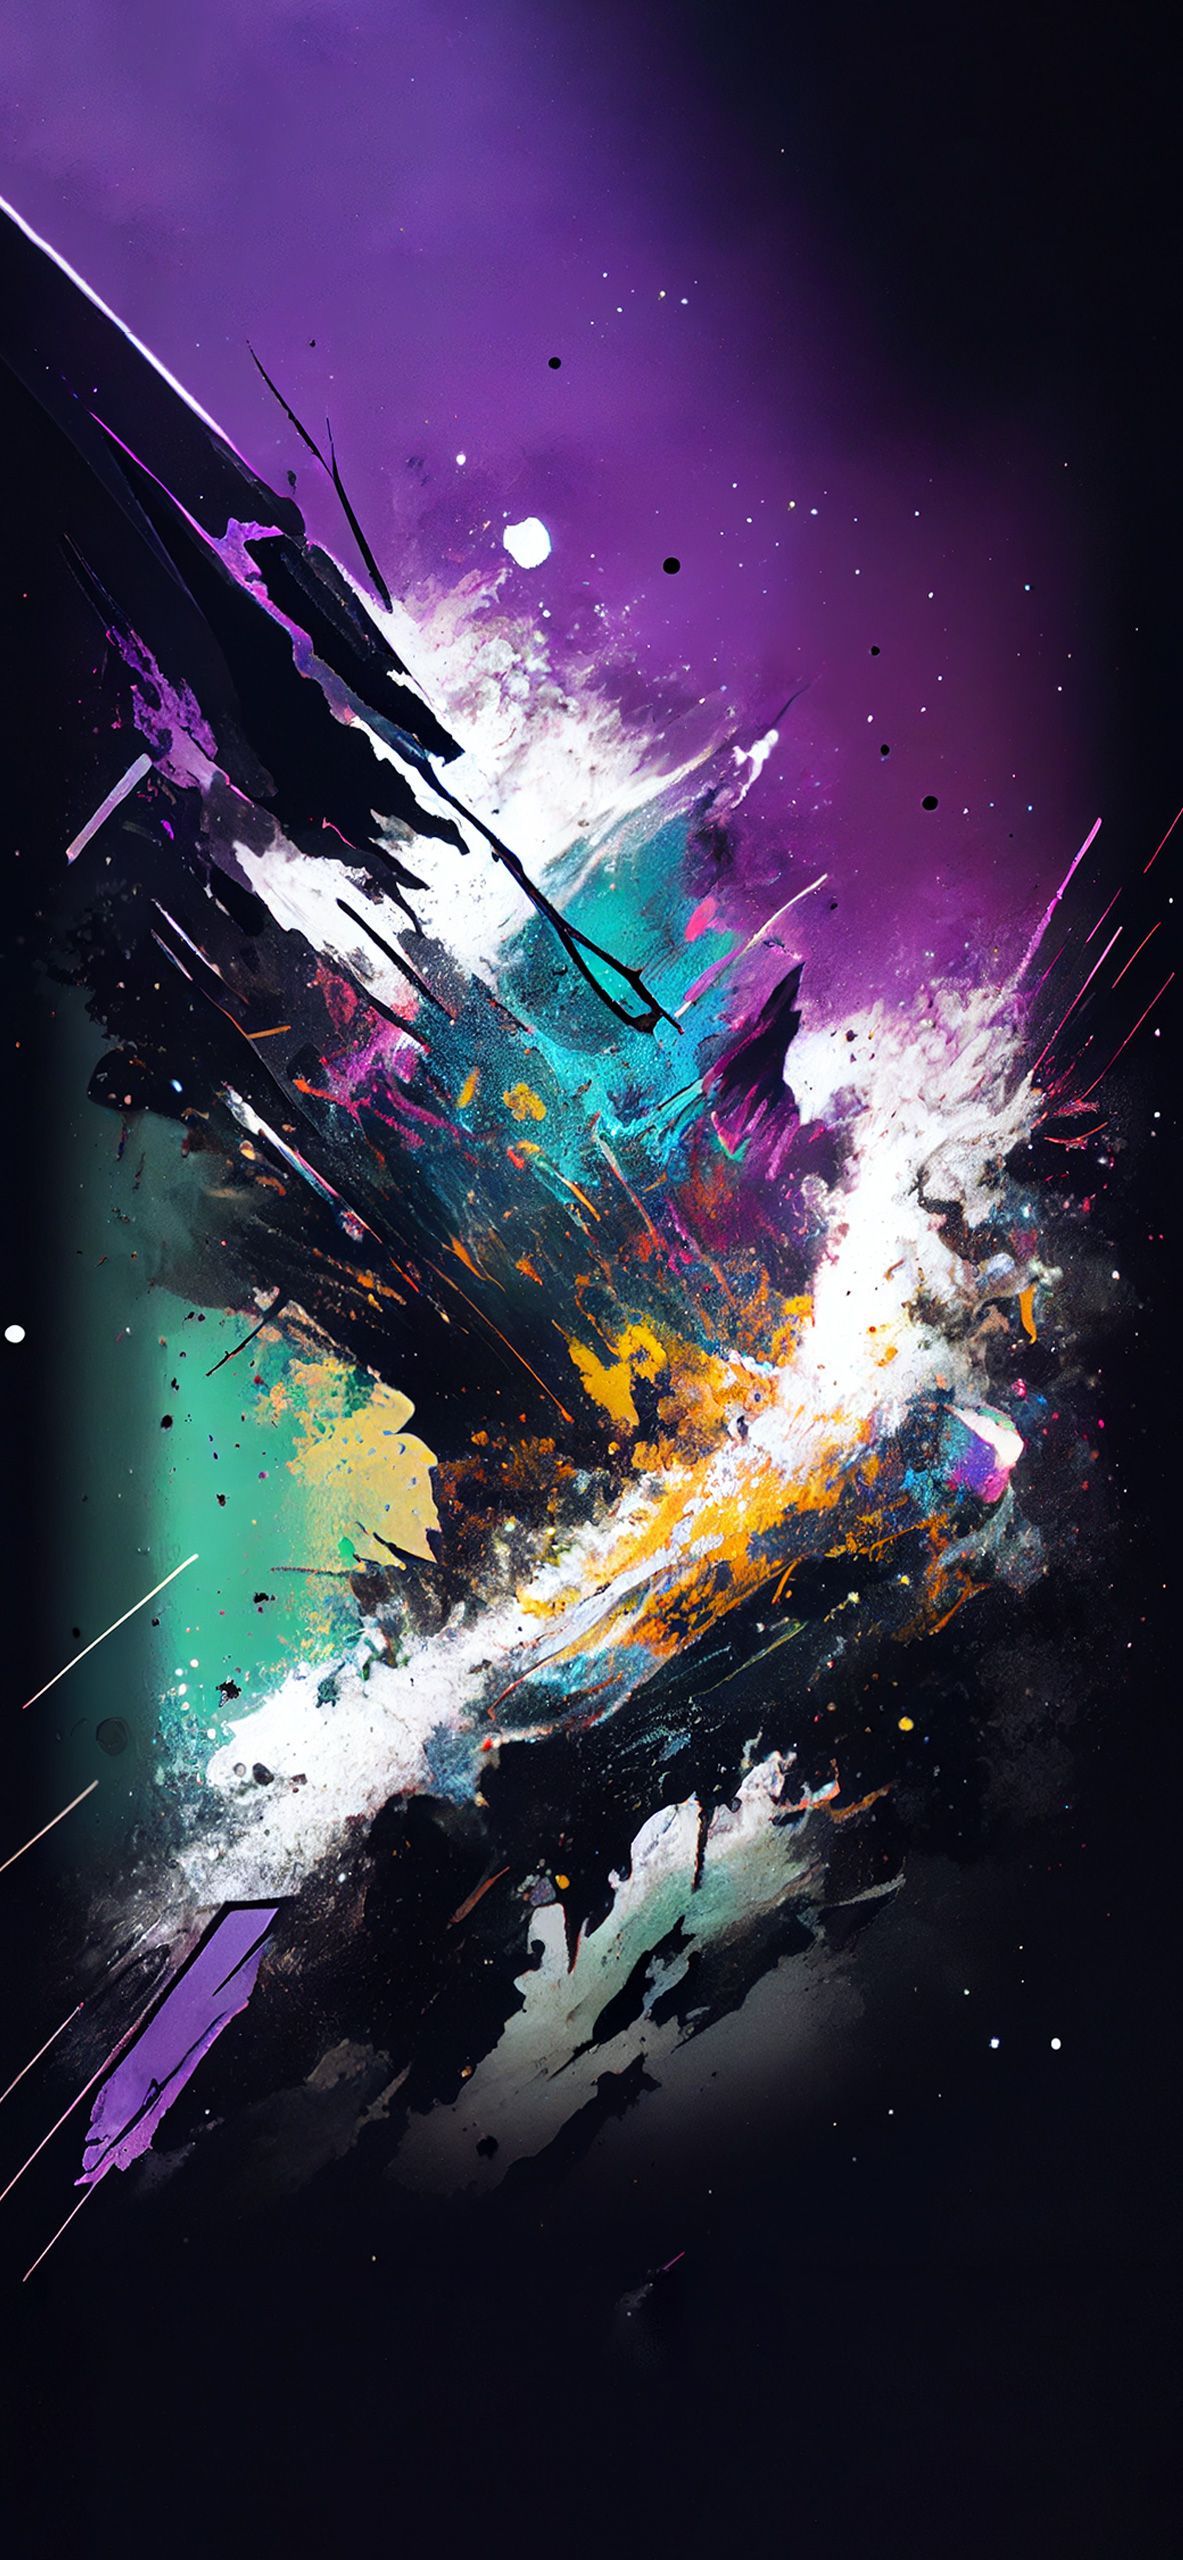 IPhone wallpaper with abstract art of a colorful splash - Abstract